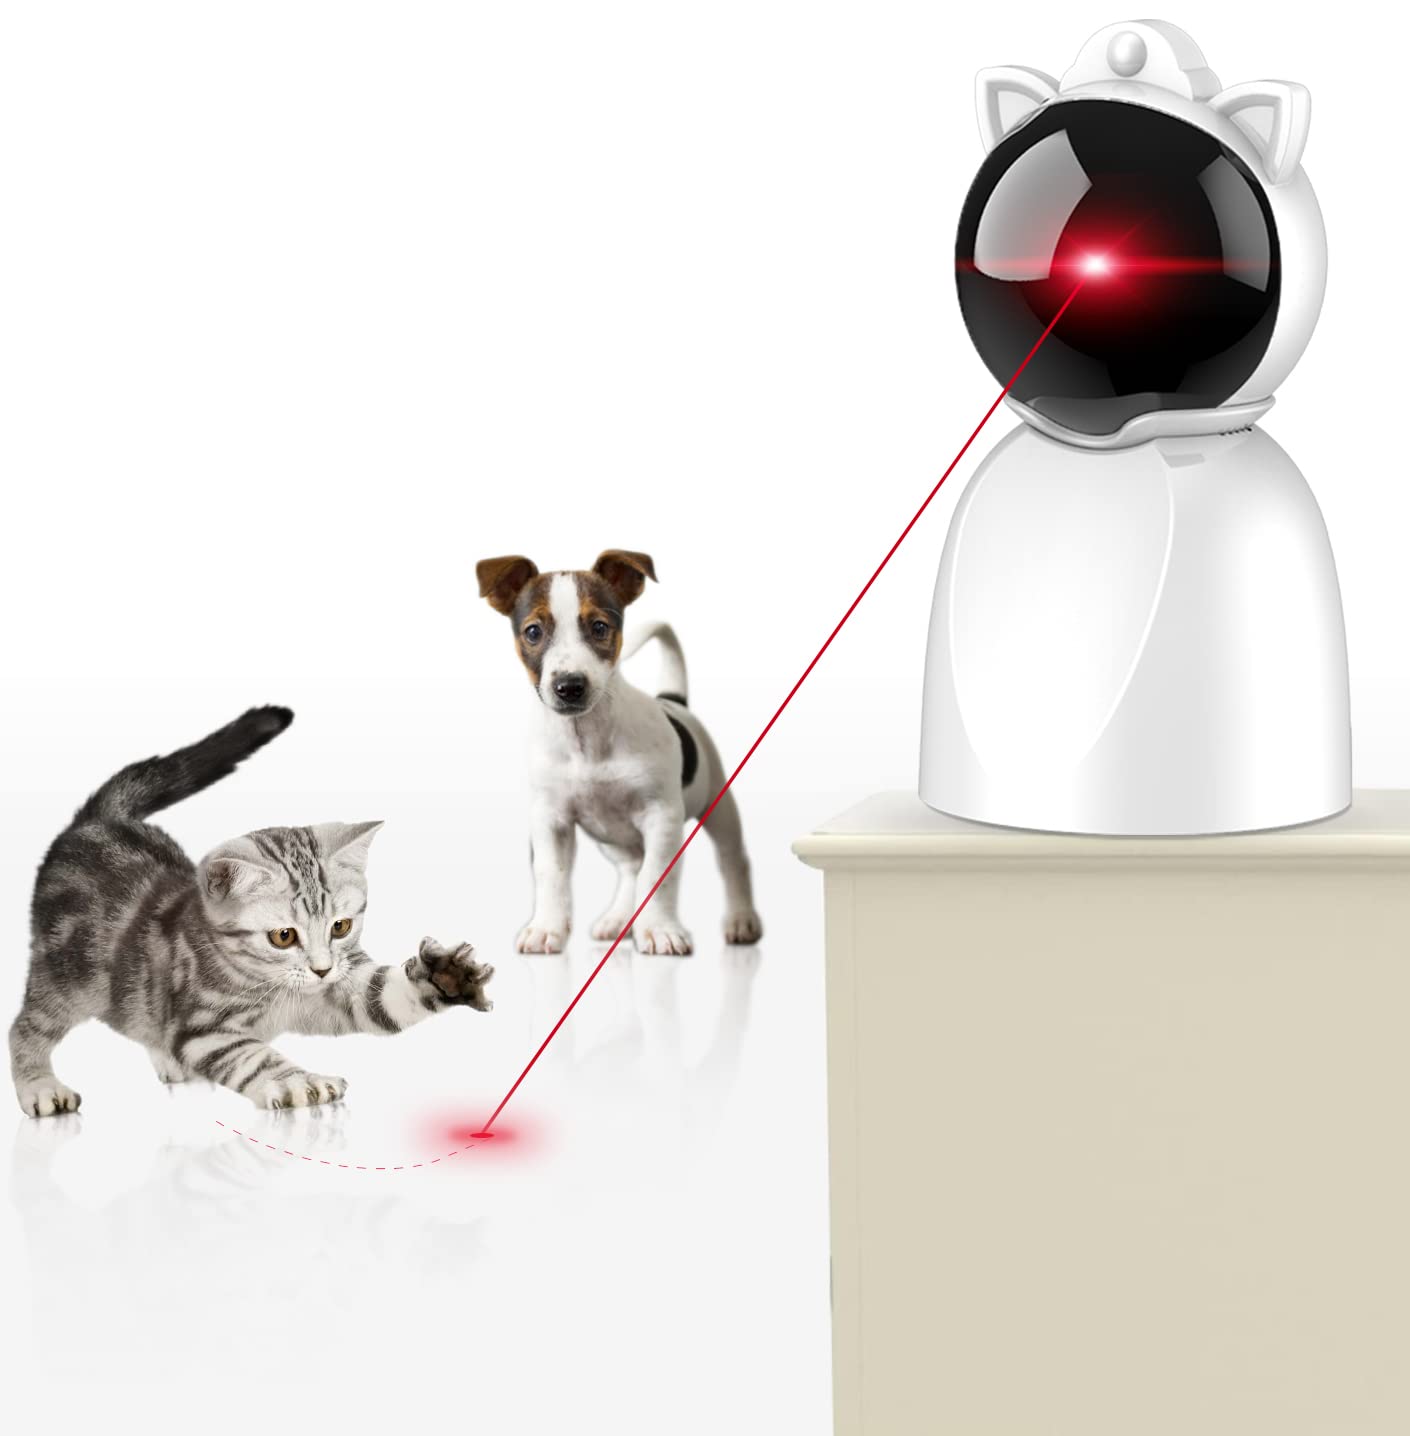 Automatic Rechargeable Cat Laser Pointer Toy with 5 Patterns